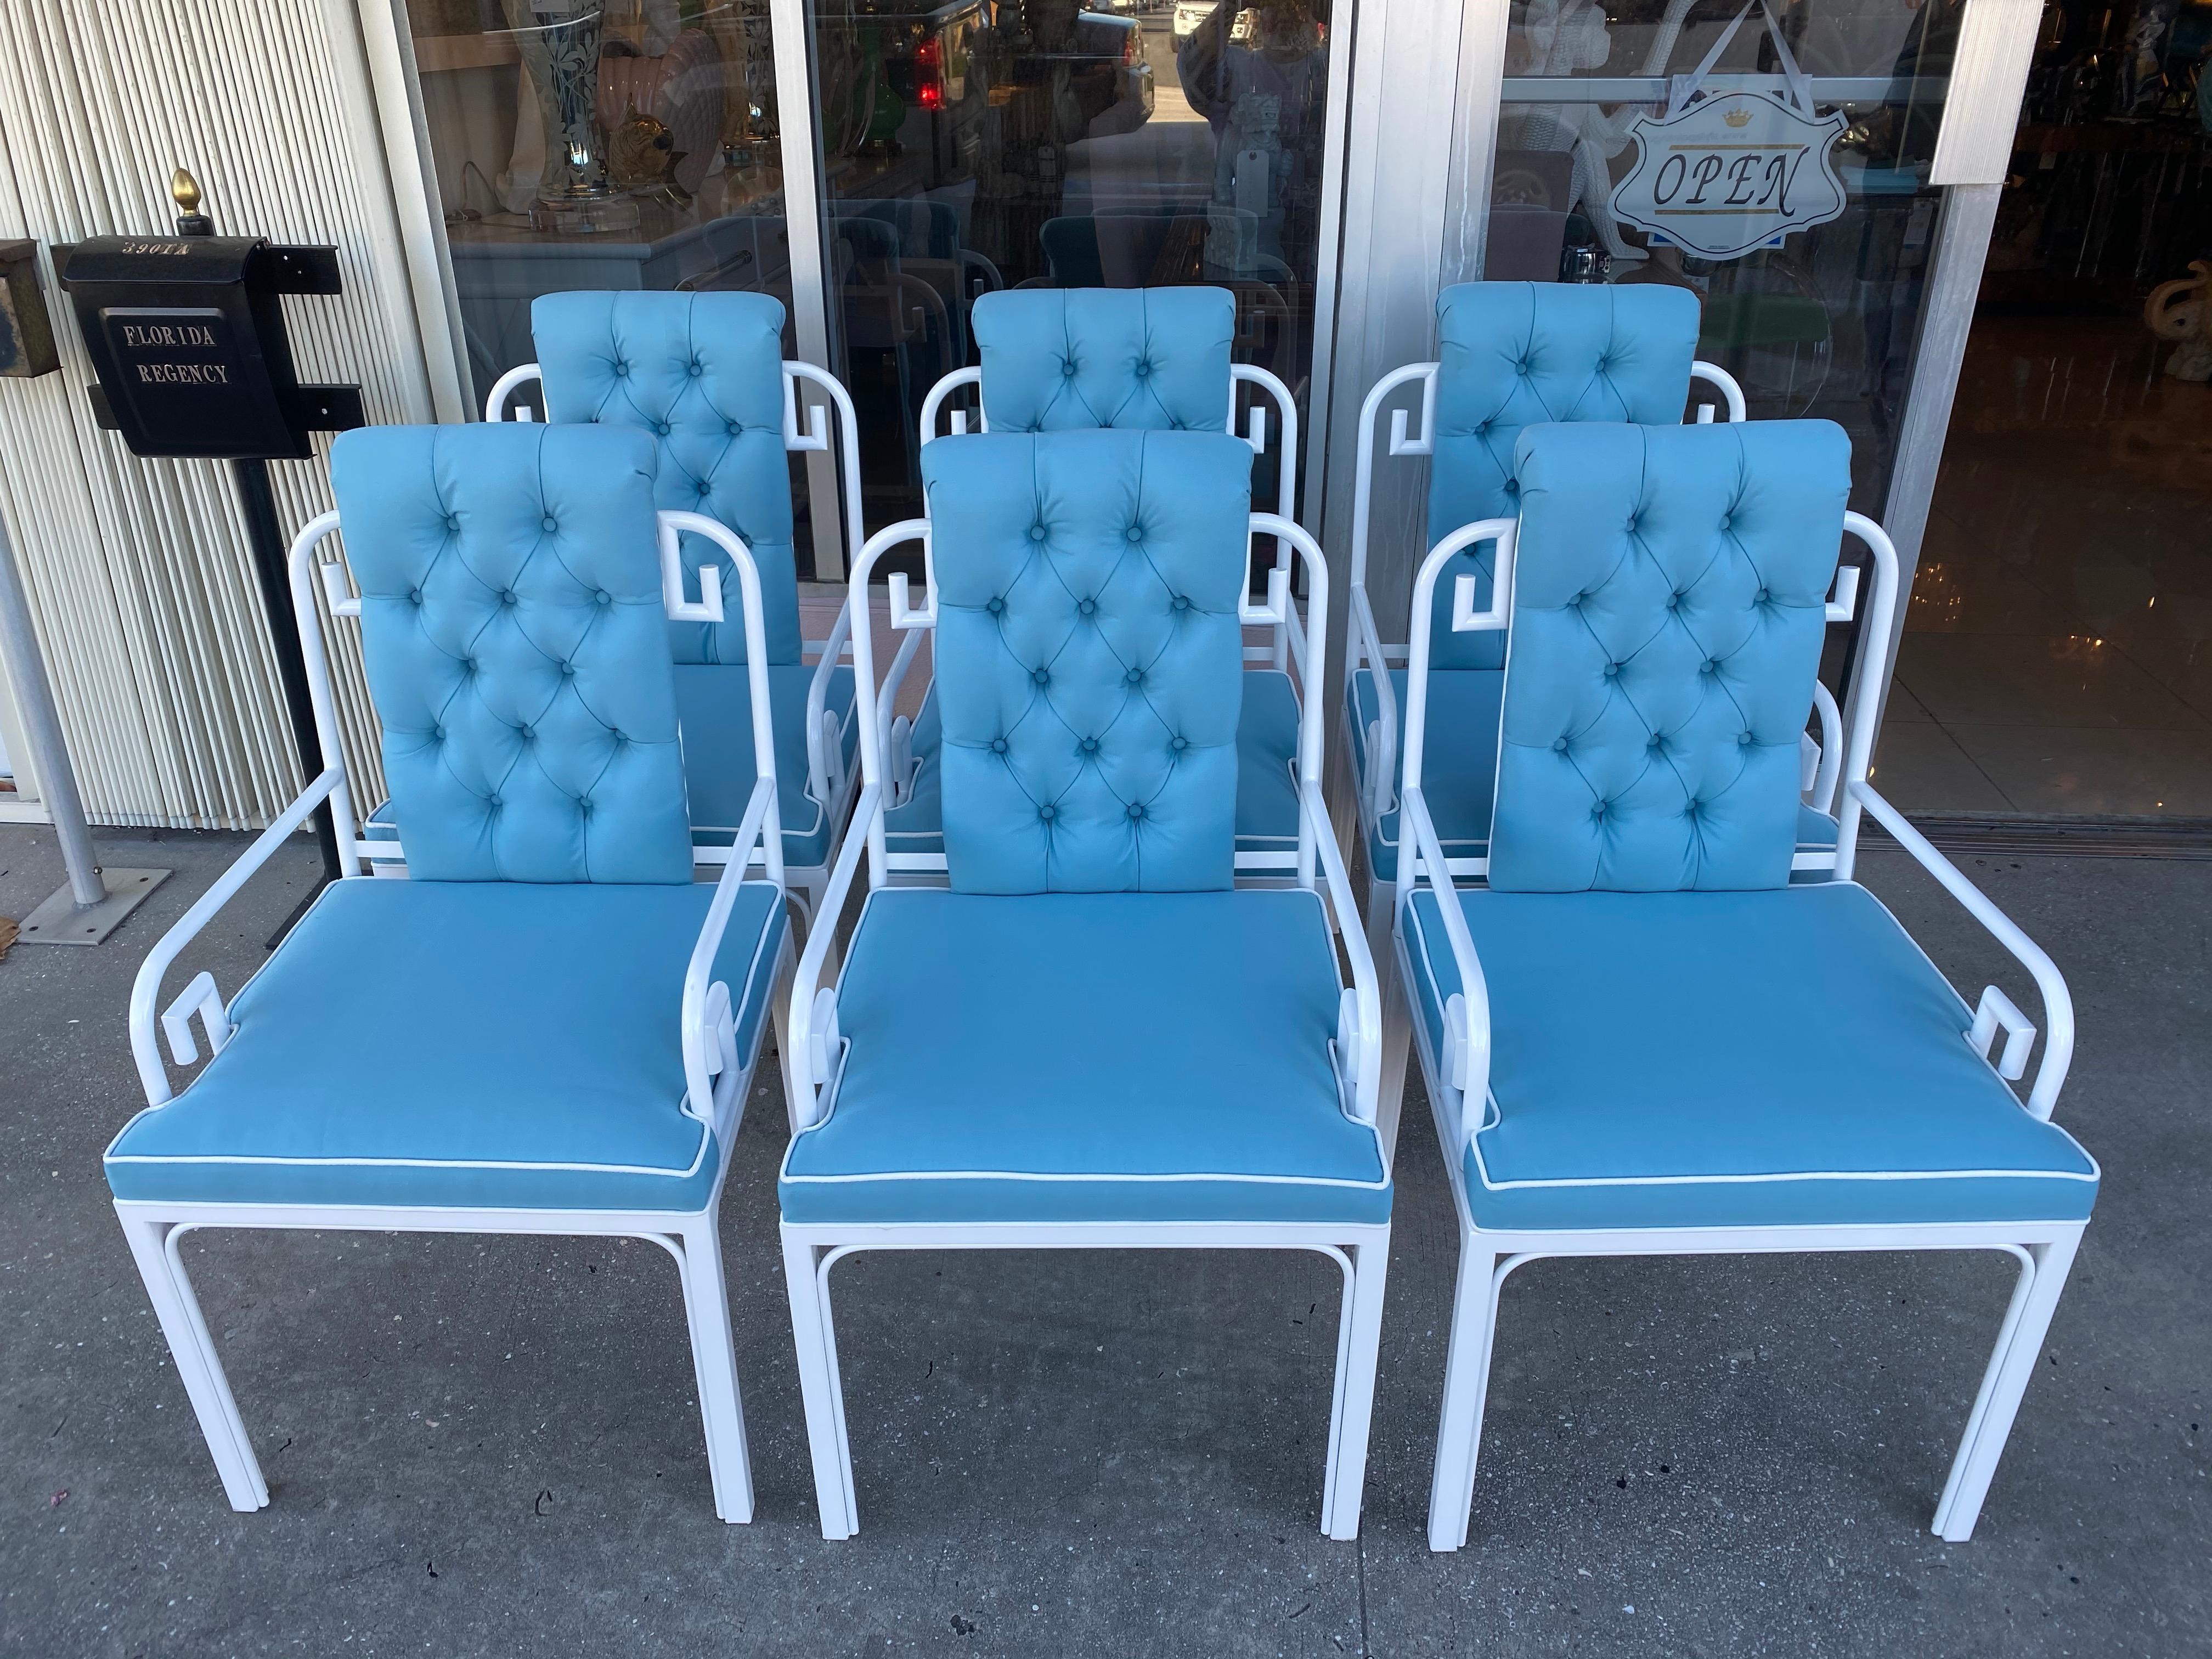 Vintage set of 6 Mastercraft Greek key arm dining chairs. These have been professionally restored from top to bottom. These can be used indoors or on a patio or porch. The set has been professionally powder-coated in a fresh white. The cushions and